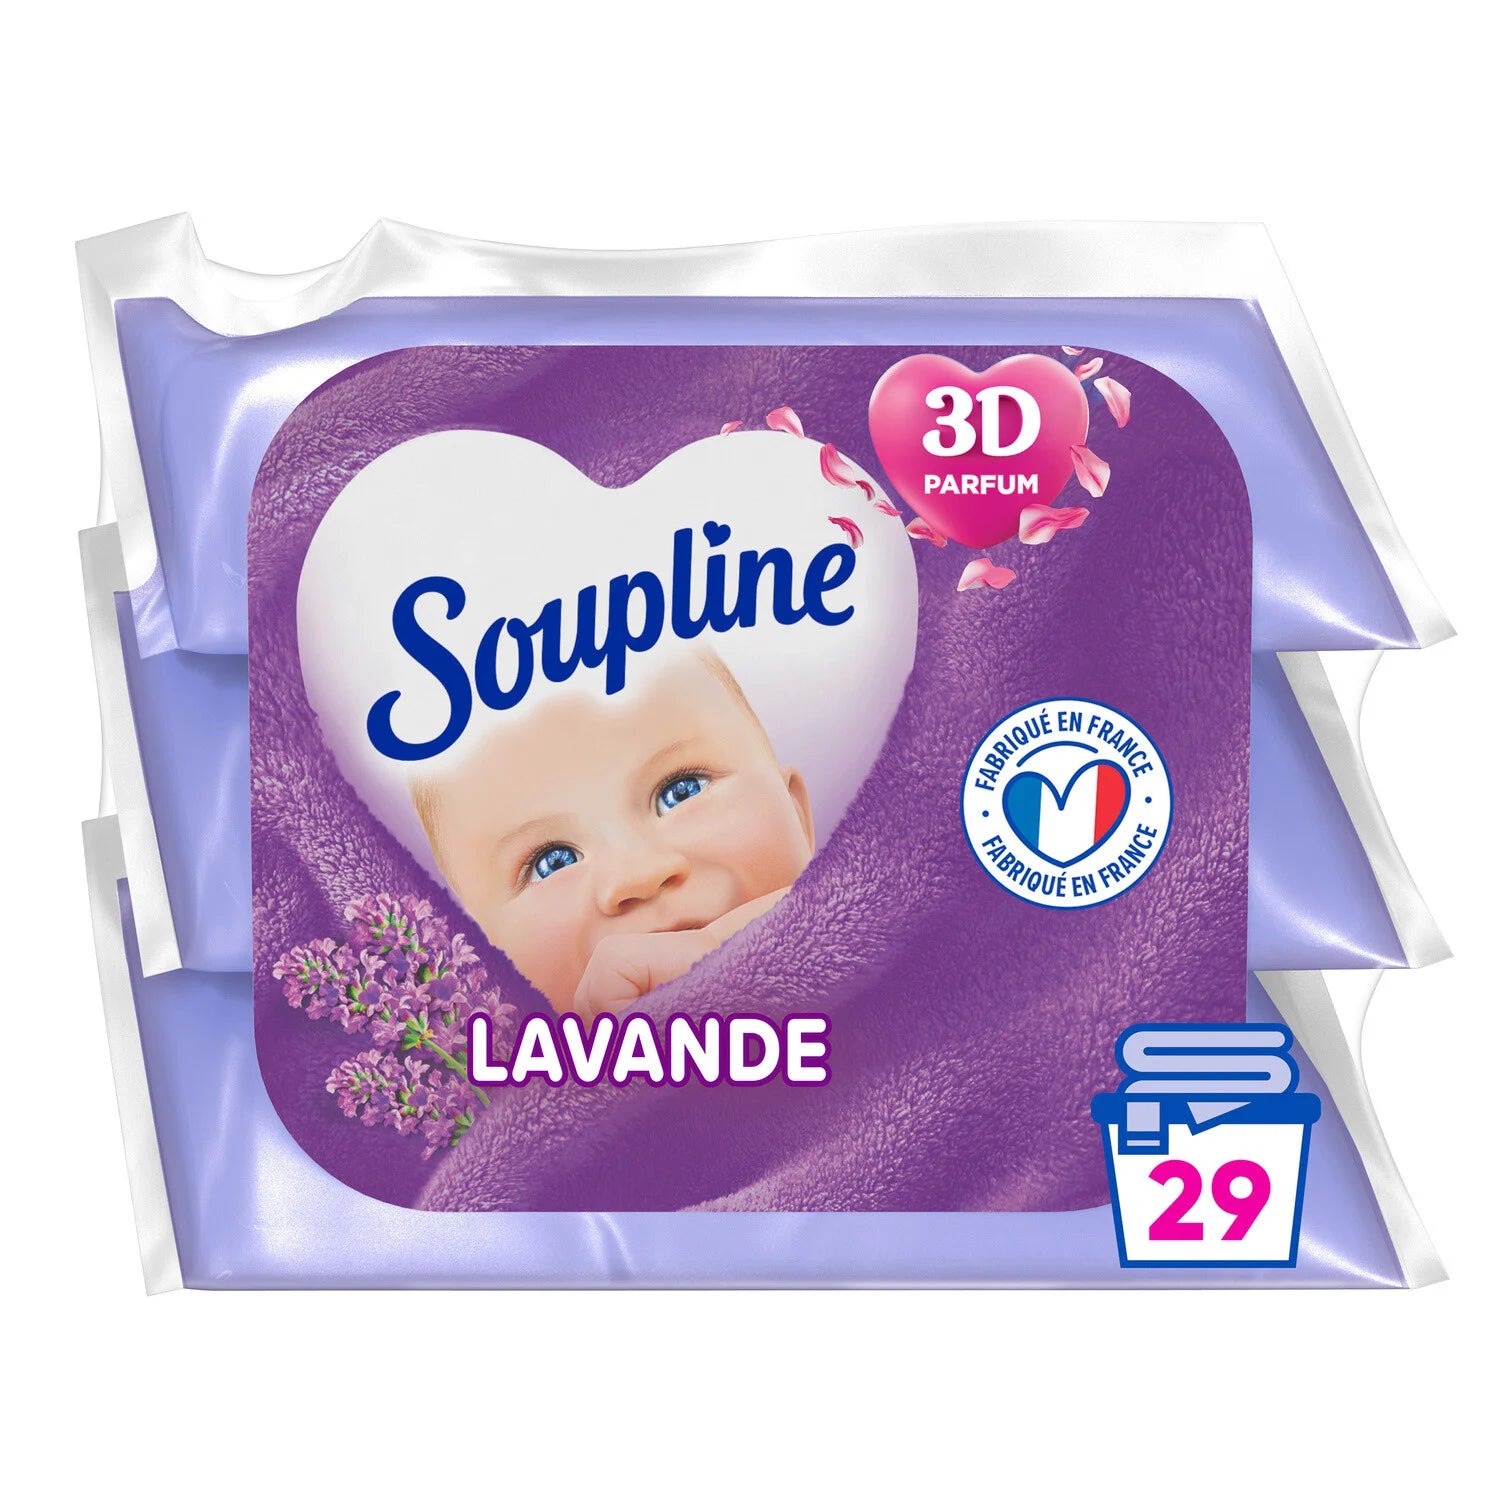 Soupline - Fabric softener - Sky Fresh eco refills - concentrated